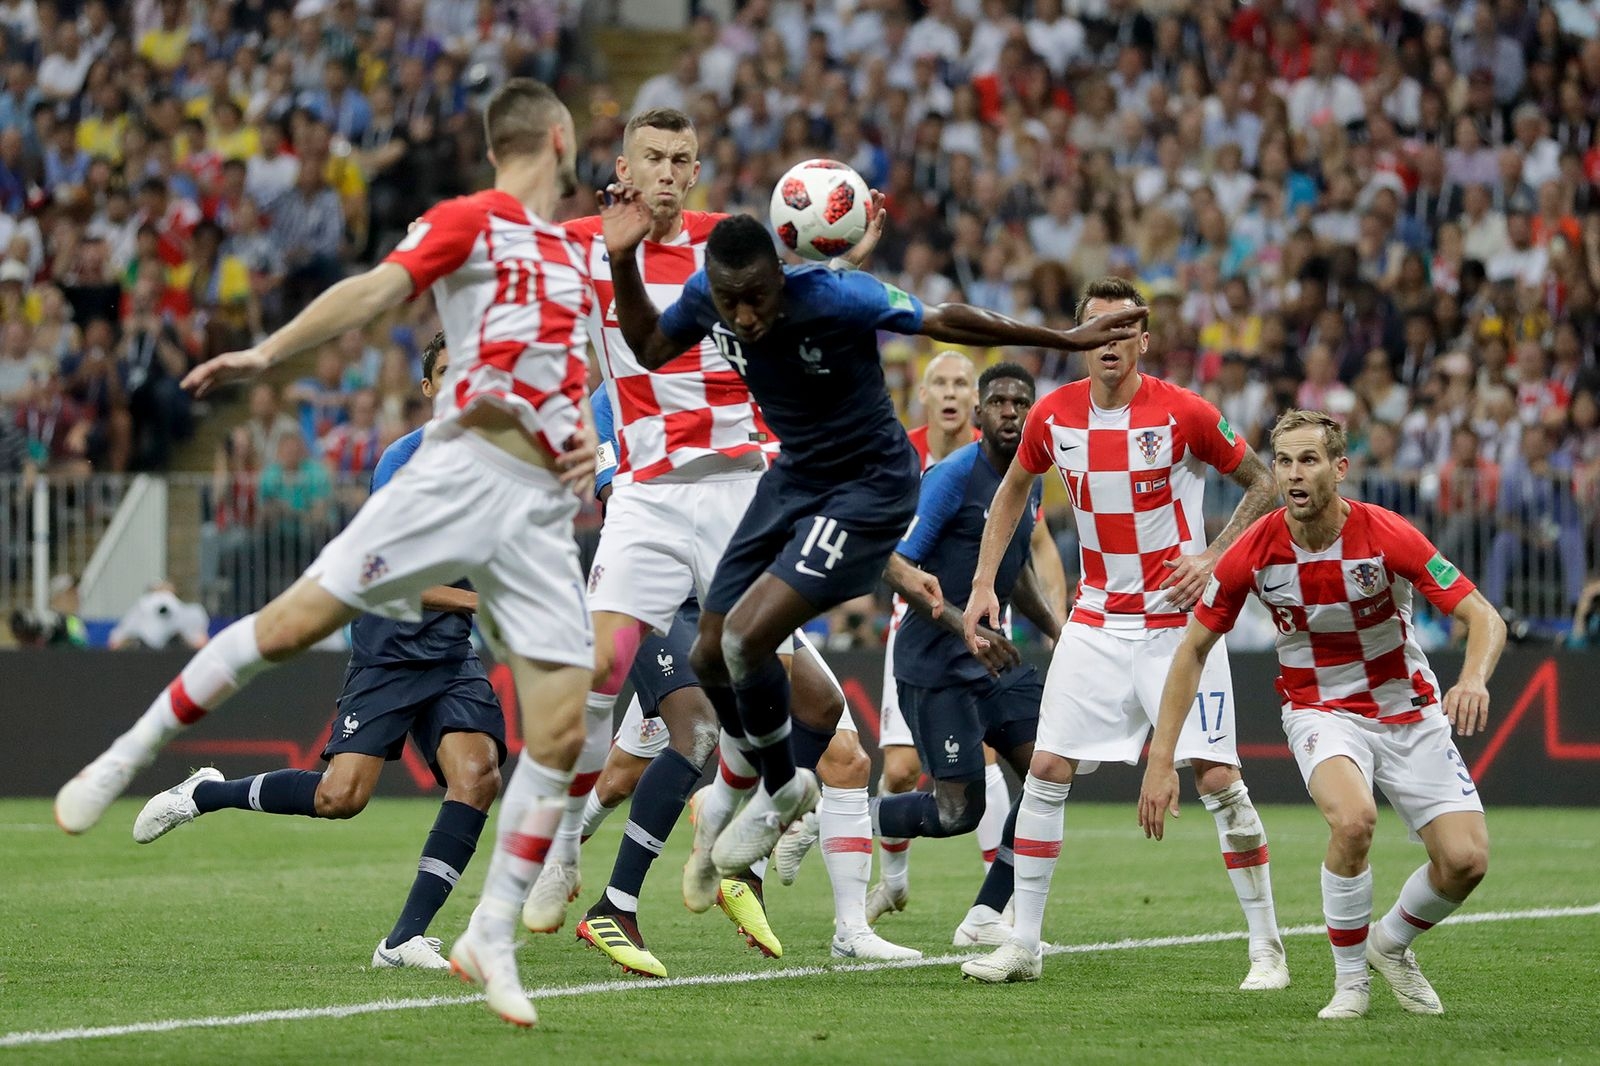 Croatia's Ivan Perisic, second left, touches the ball with his hand as he jumps for the ball with France's Blaise Matuidi during the final match between France and Croatia at the 2018 soccer World Cup in the Luzhniki Stadium in Moscow, Russia, Sunday, July 15, 2018. (AP Photo/Matthias Schrader)